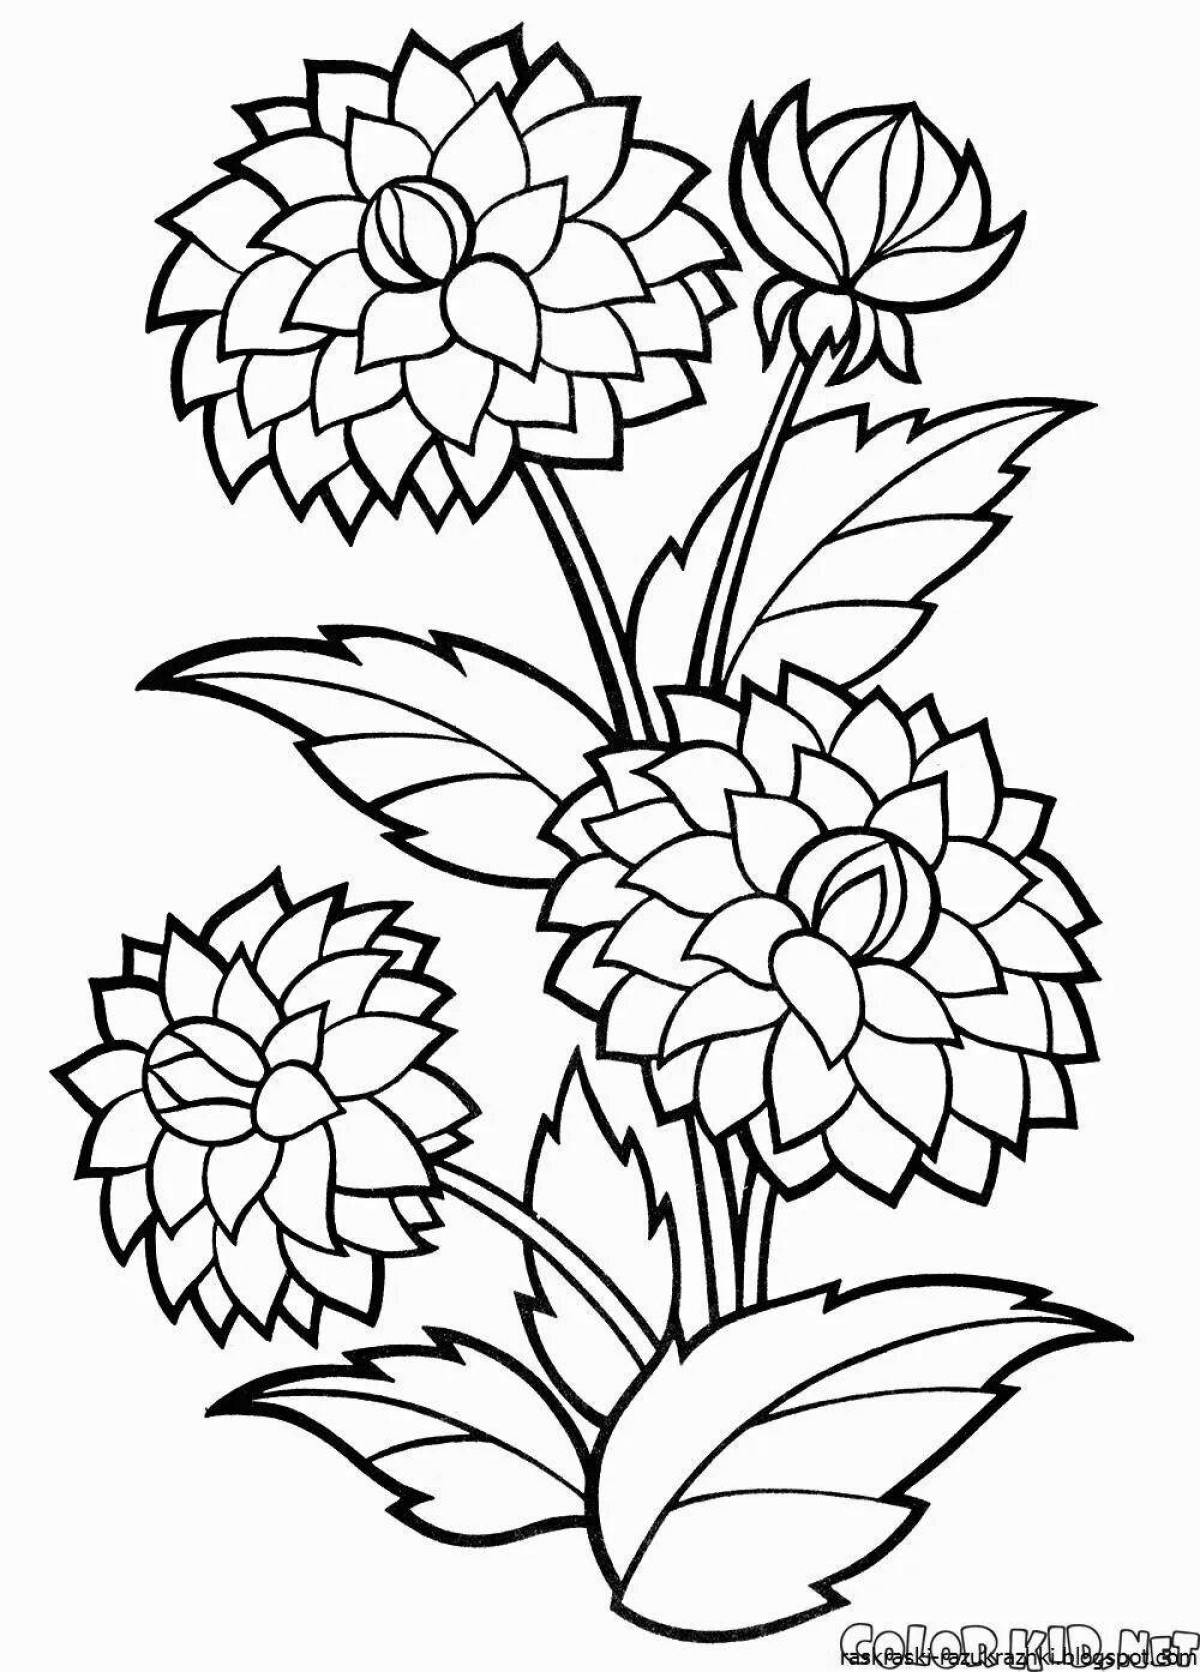 Delightful coloring flower for children 5-6 years old